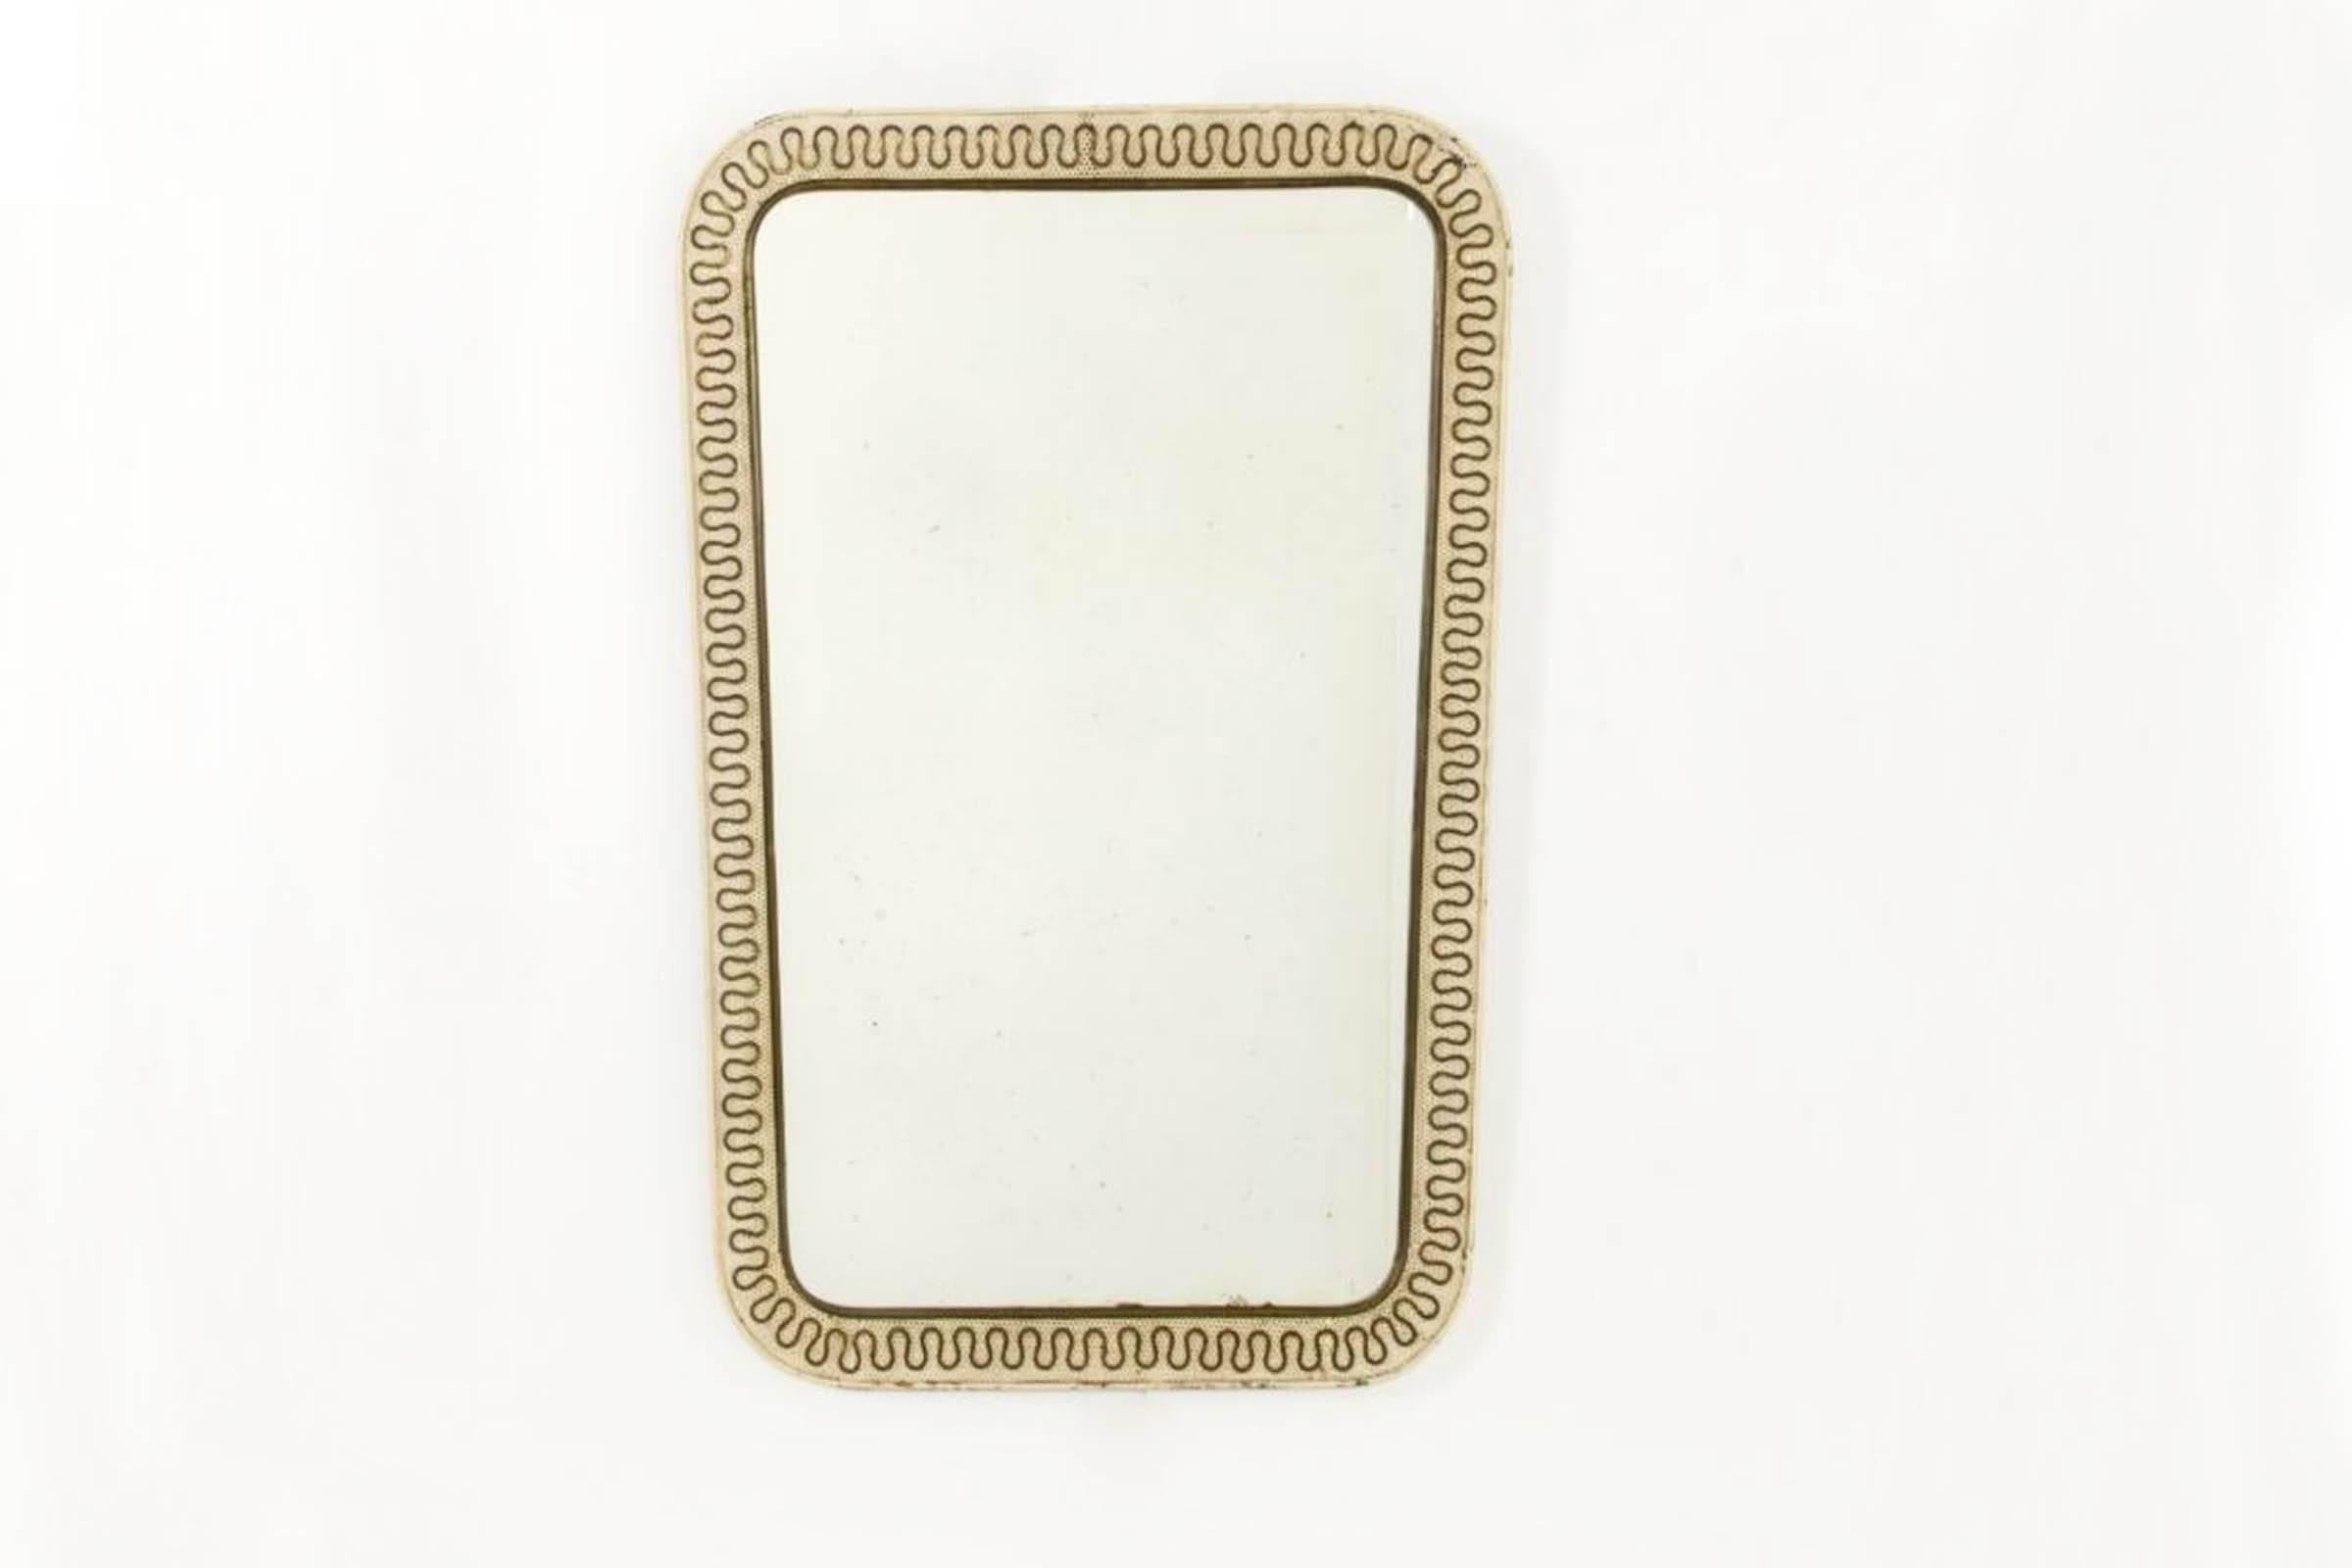 Take note of the stylish details in brass.